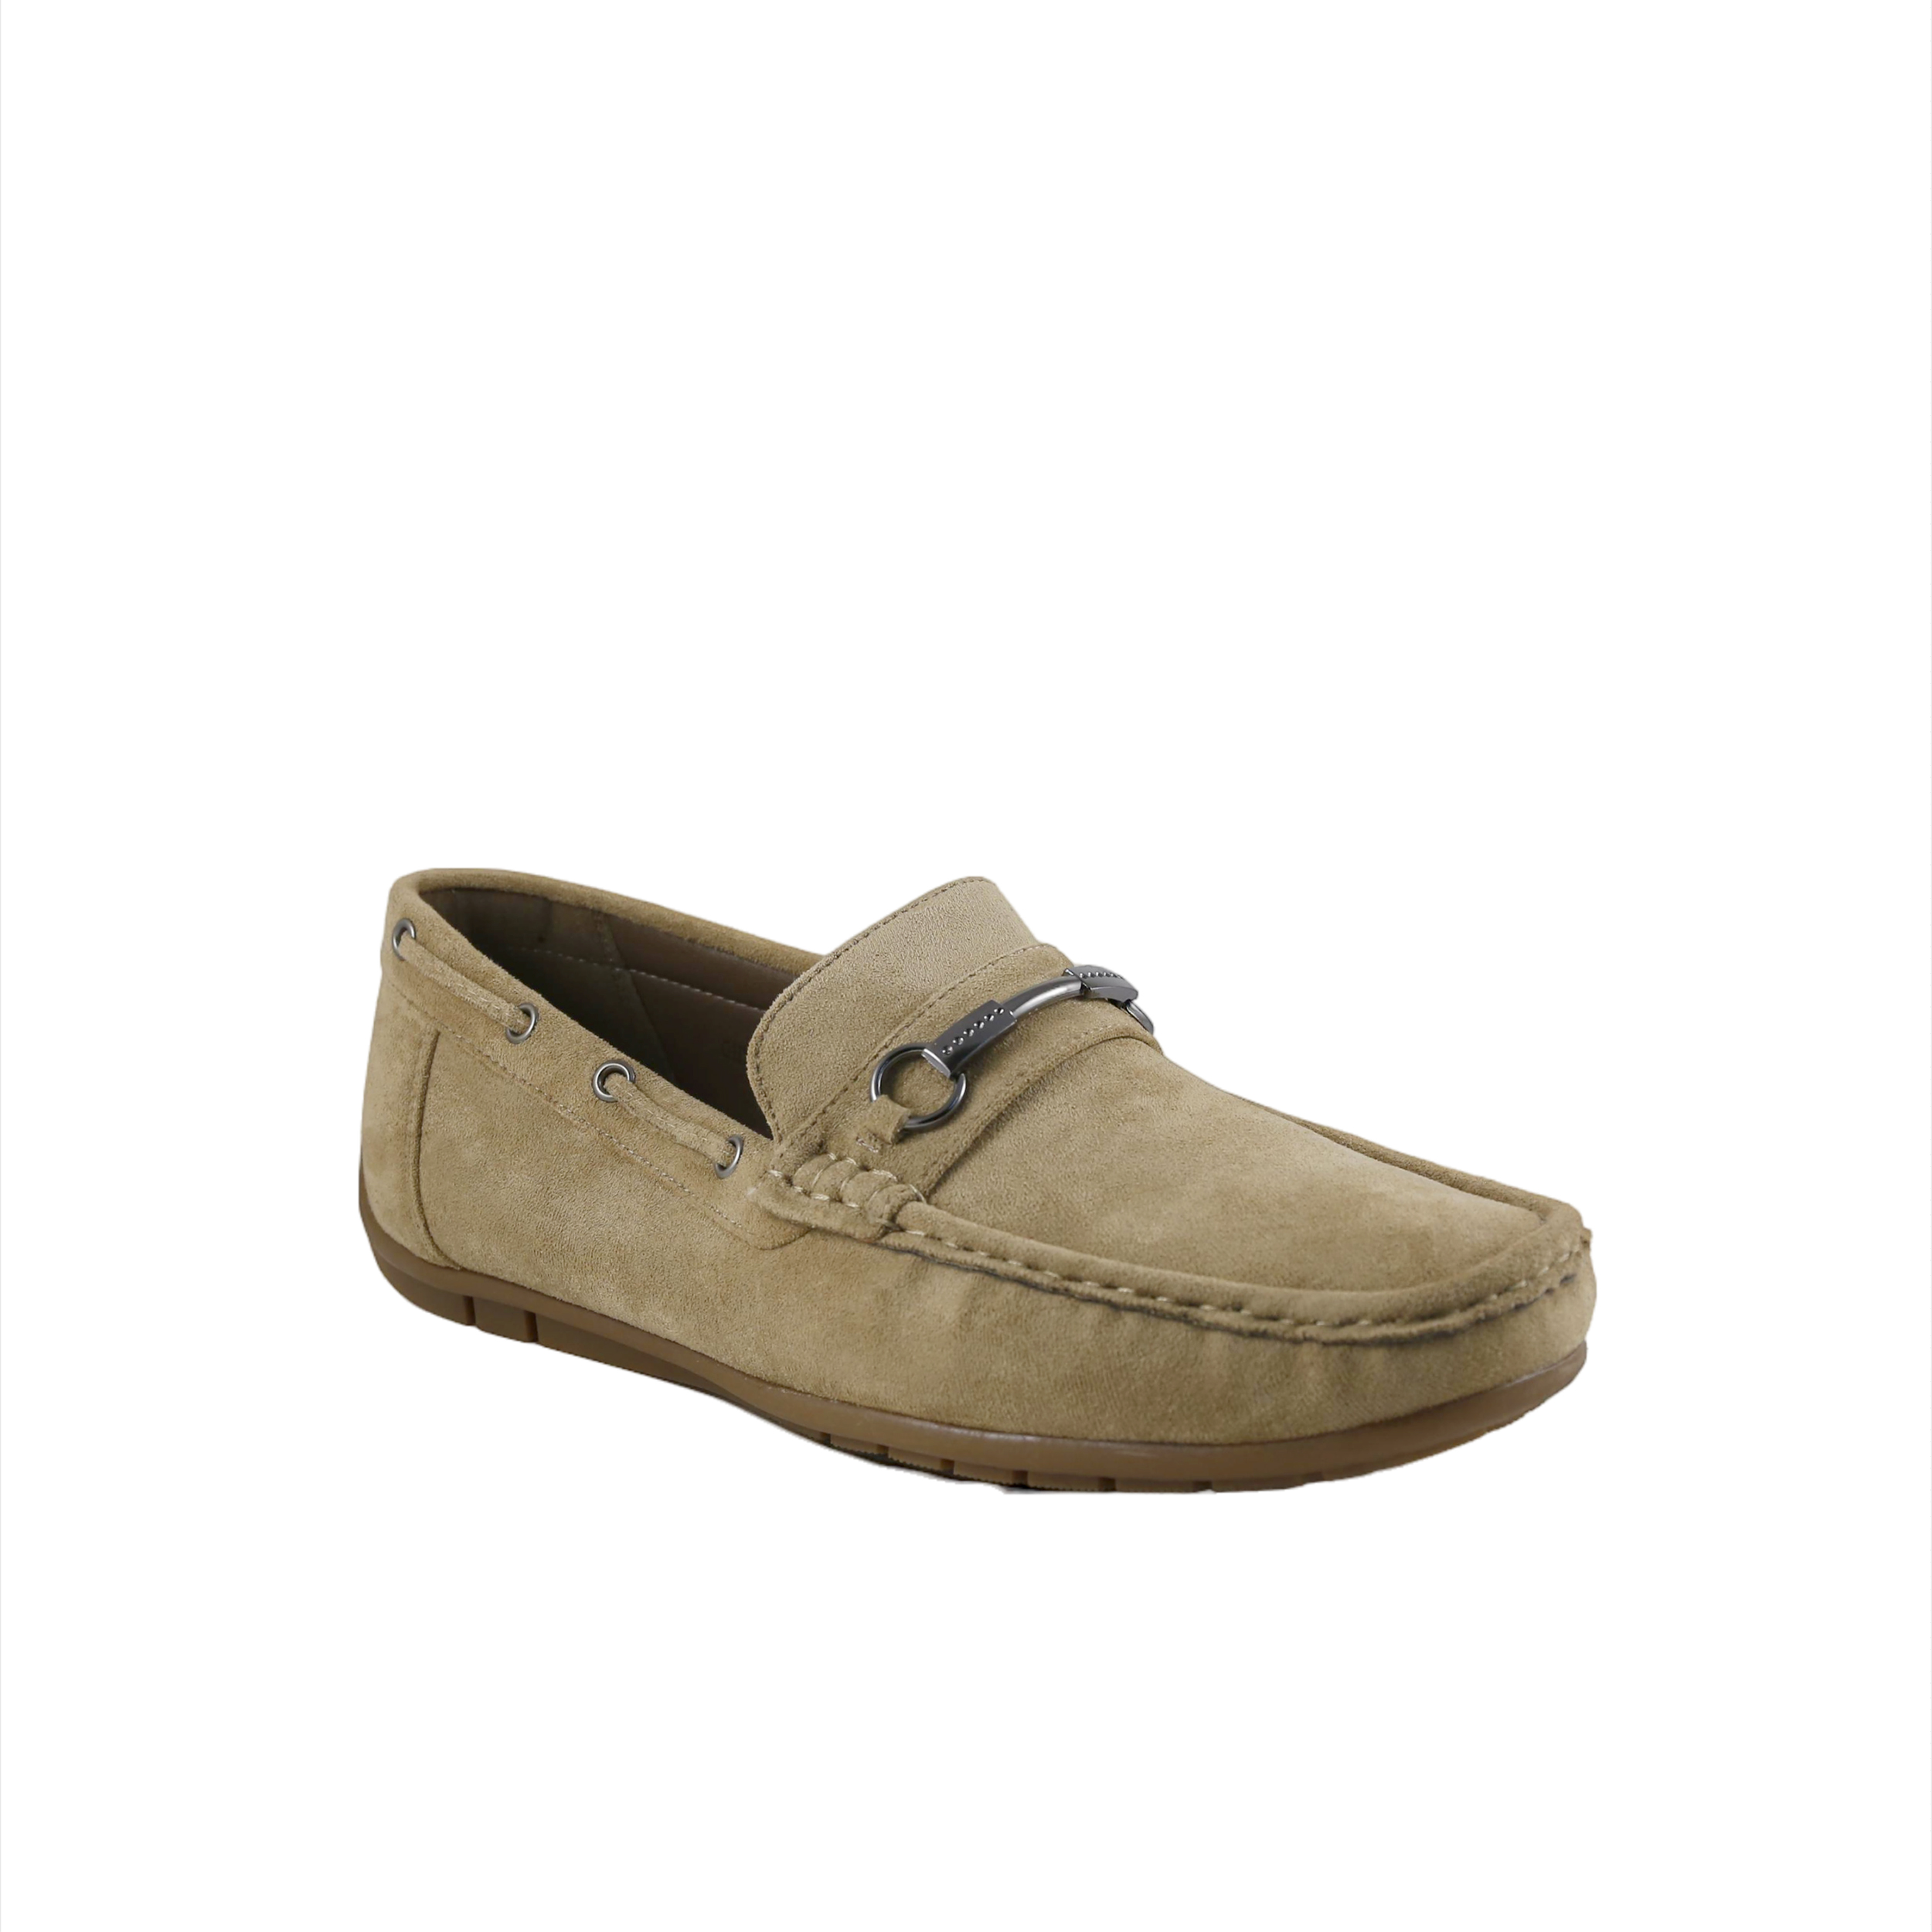 Man Shoes Mocassins - Loafers Suede moccasin